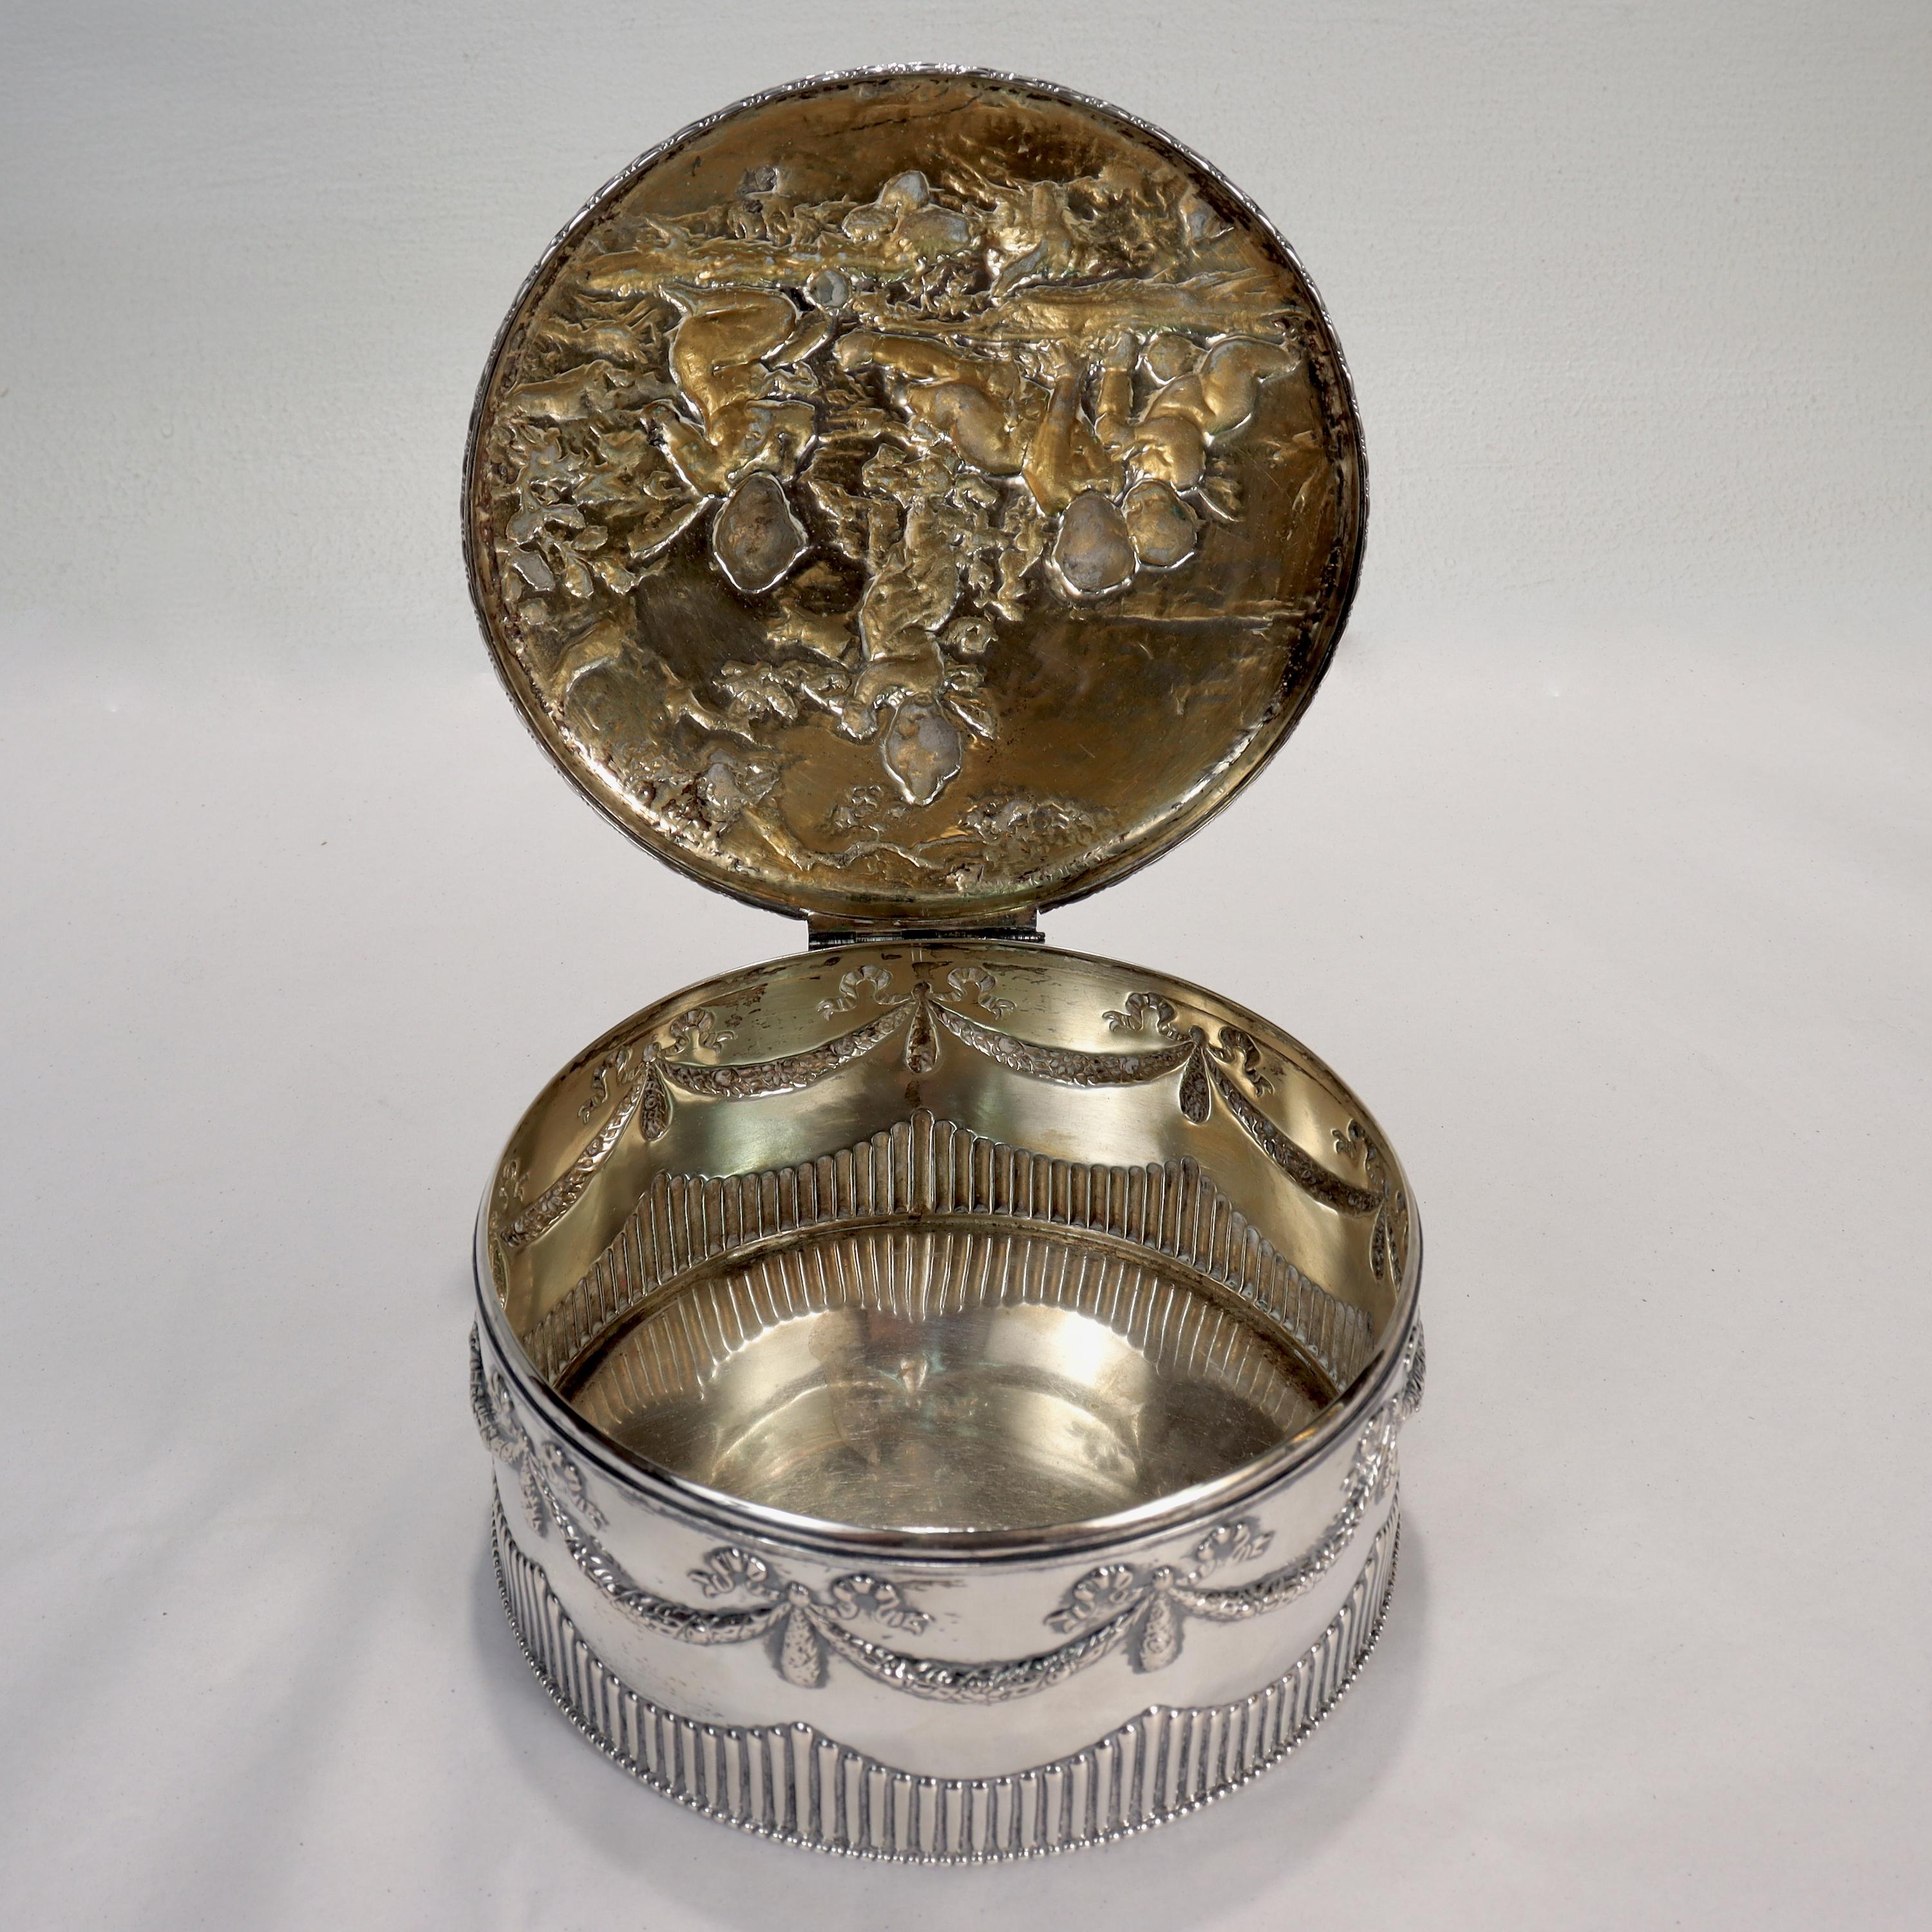 Antique Signed German Figural Neoclassical Silver Table Dresser Box or Casket For Sale 5